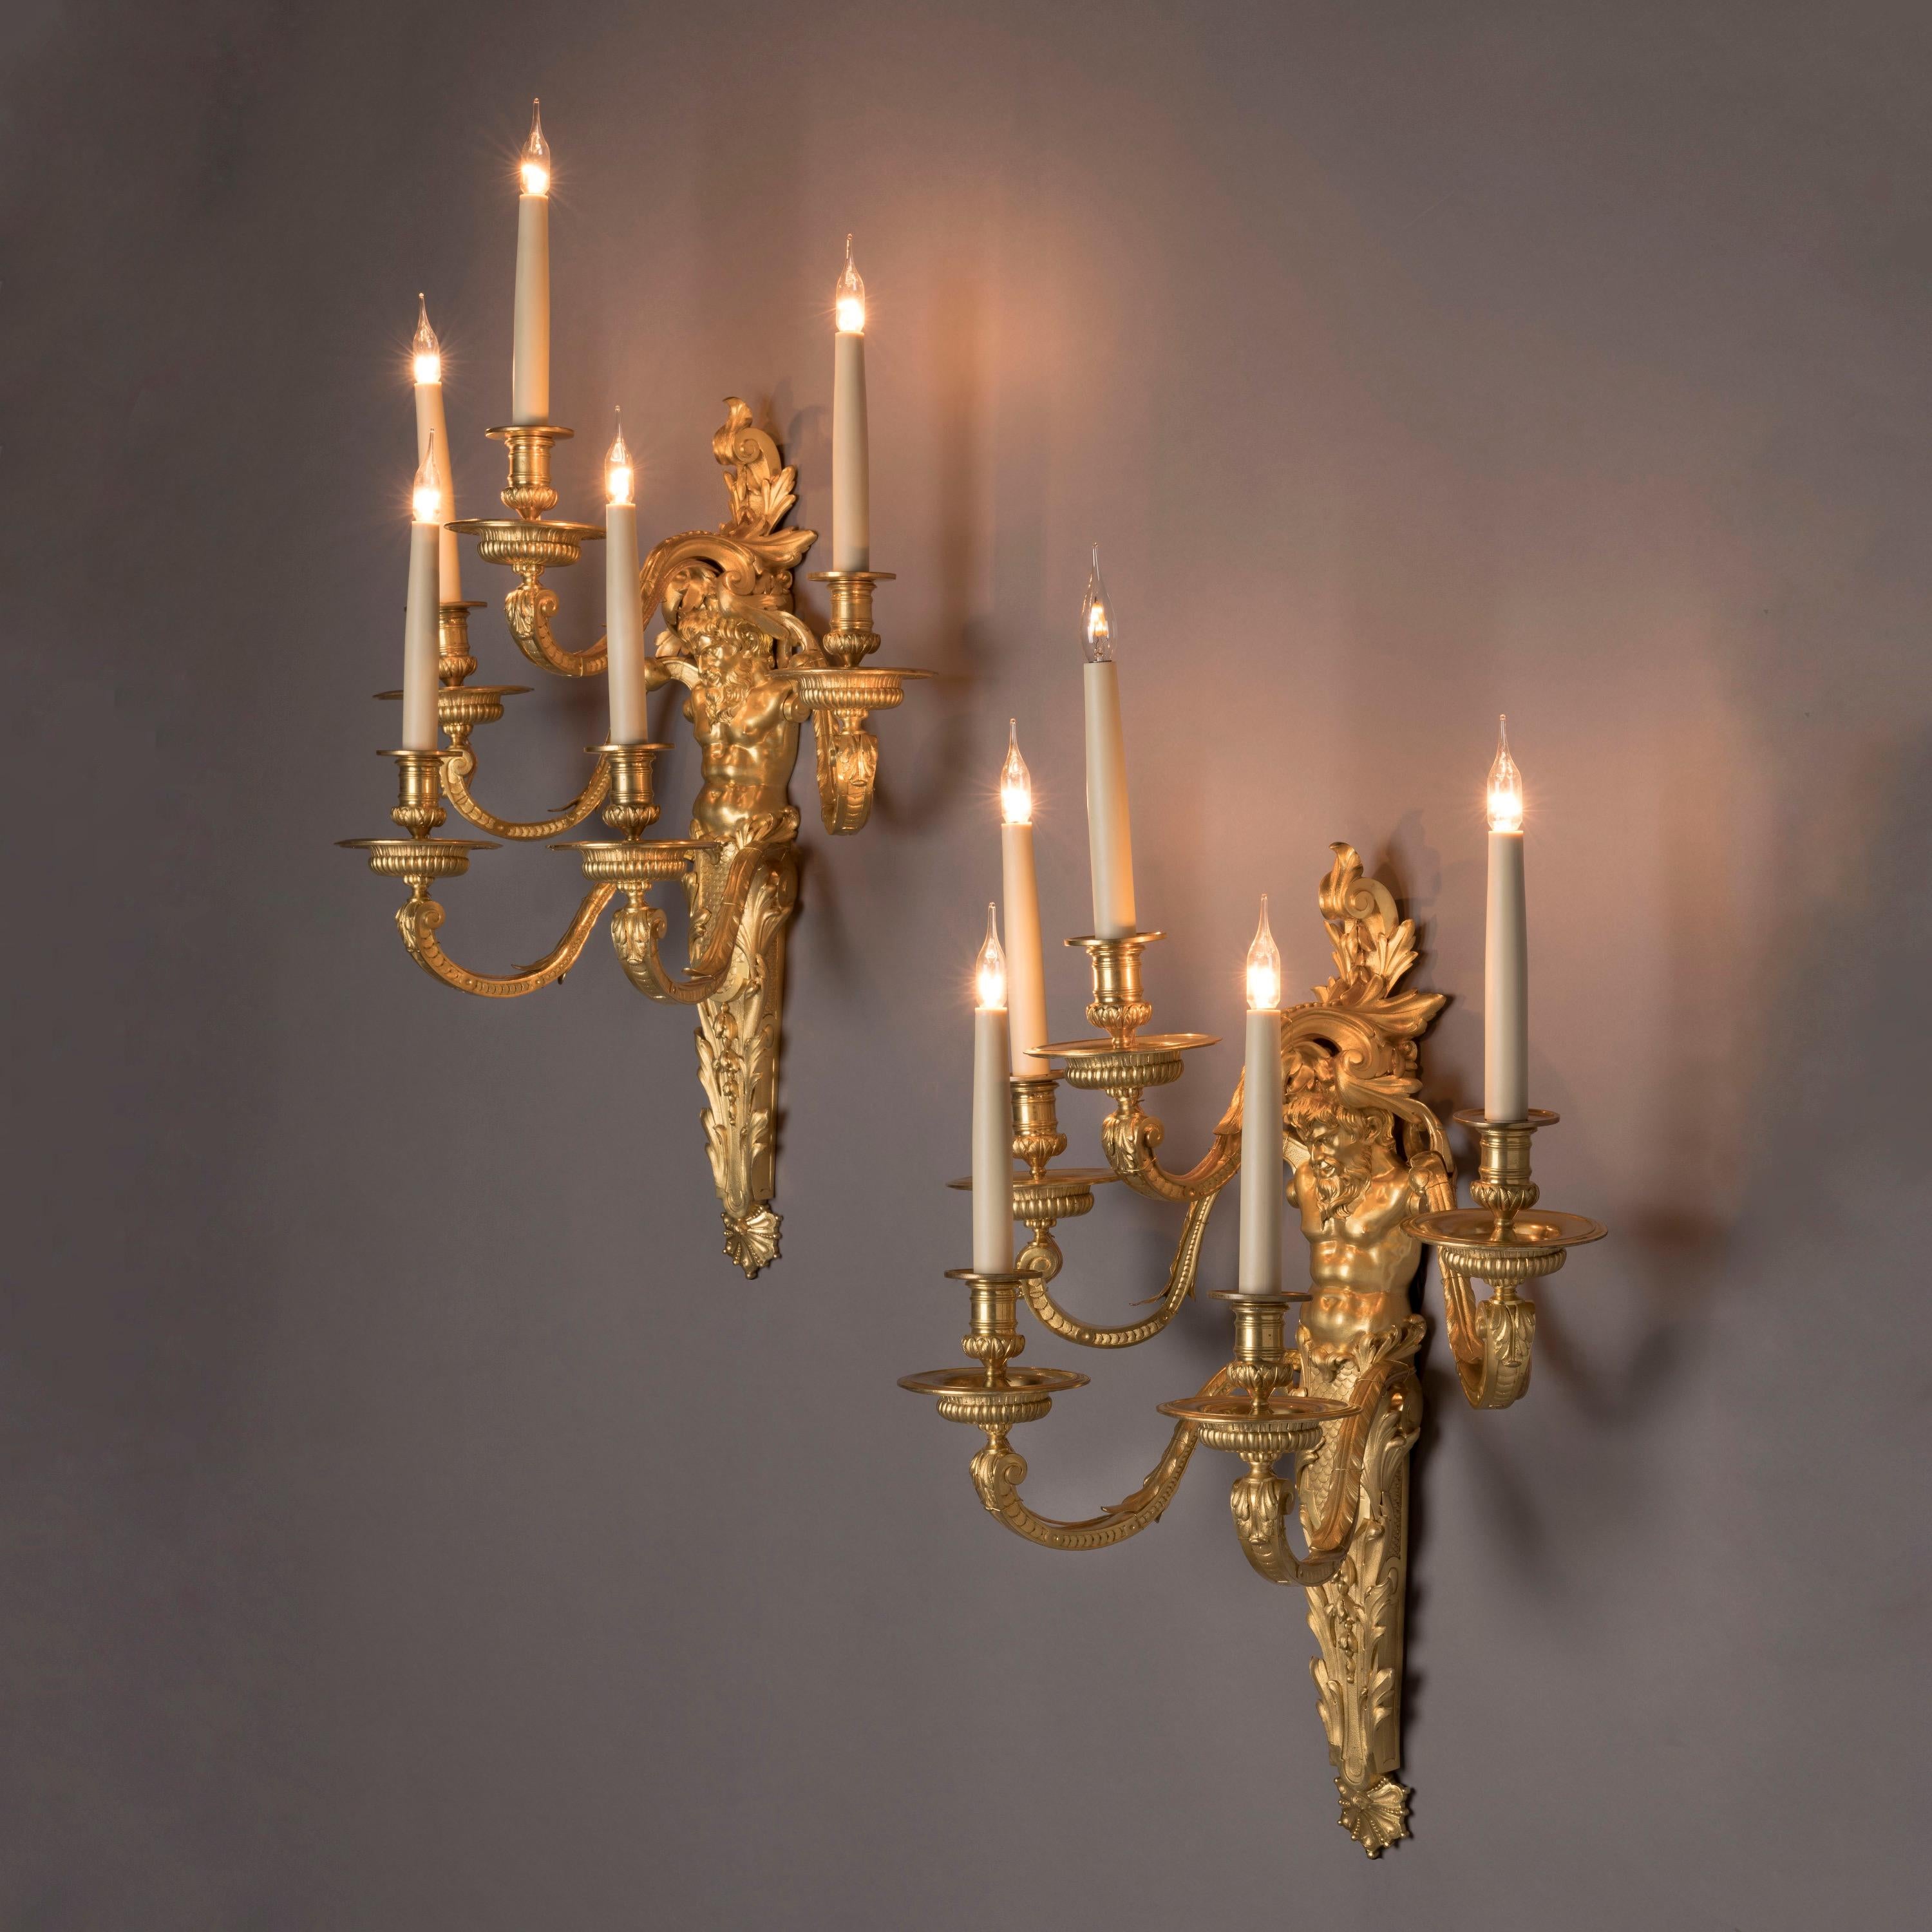 An Important Pair of Louis XIV Style Wall Appliques By Henry Dasson of Paris

Of the highest quality and retaining its original fire gilded finish with burnished highlights, each wall applique modelled as a bearded male herm emerging from a